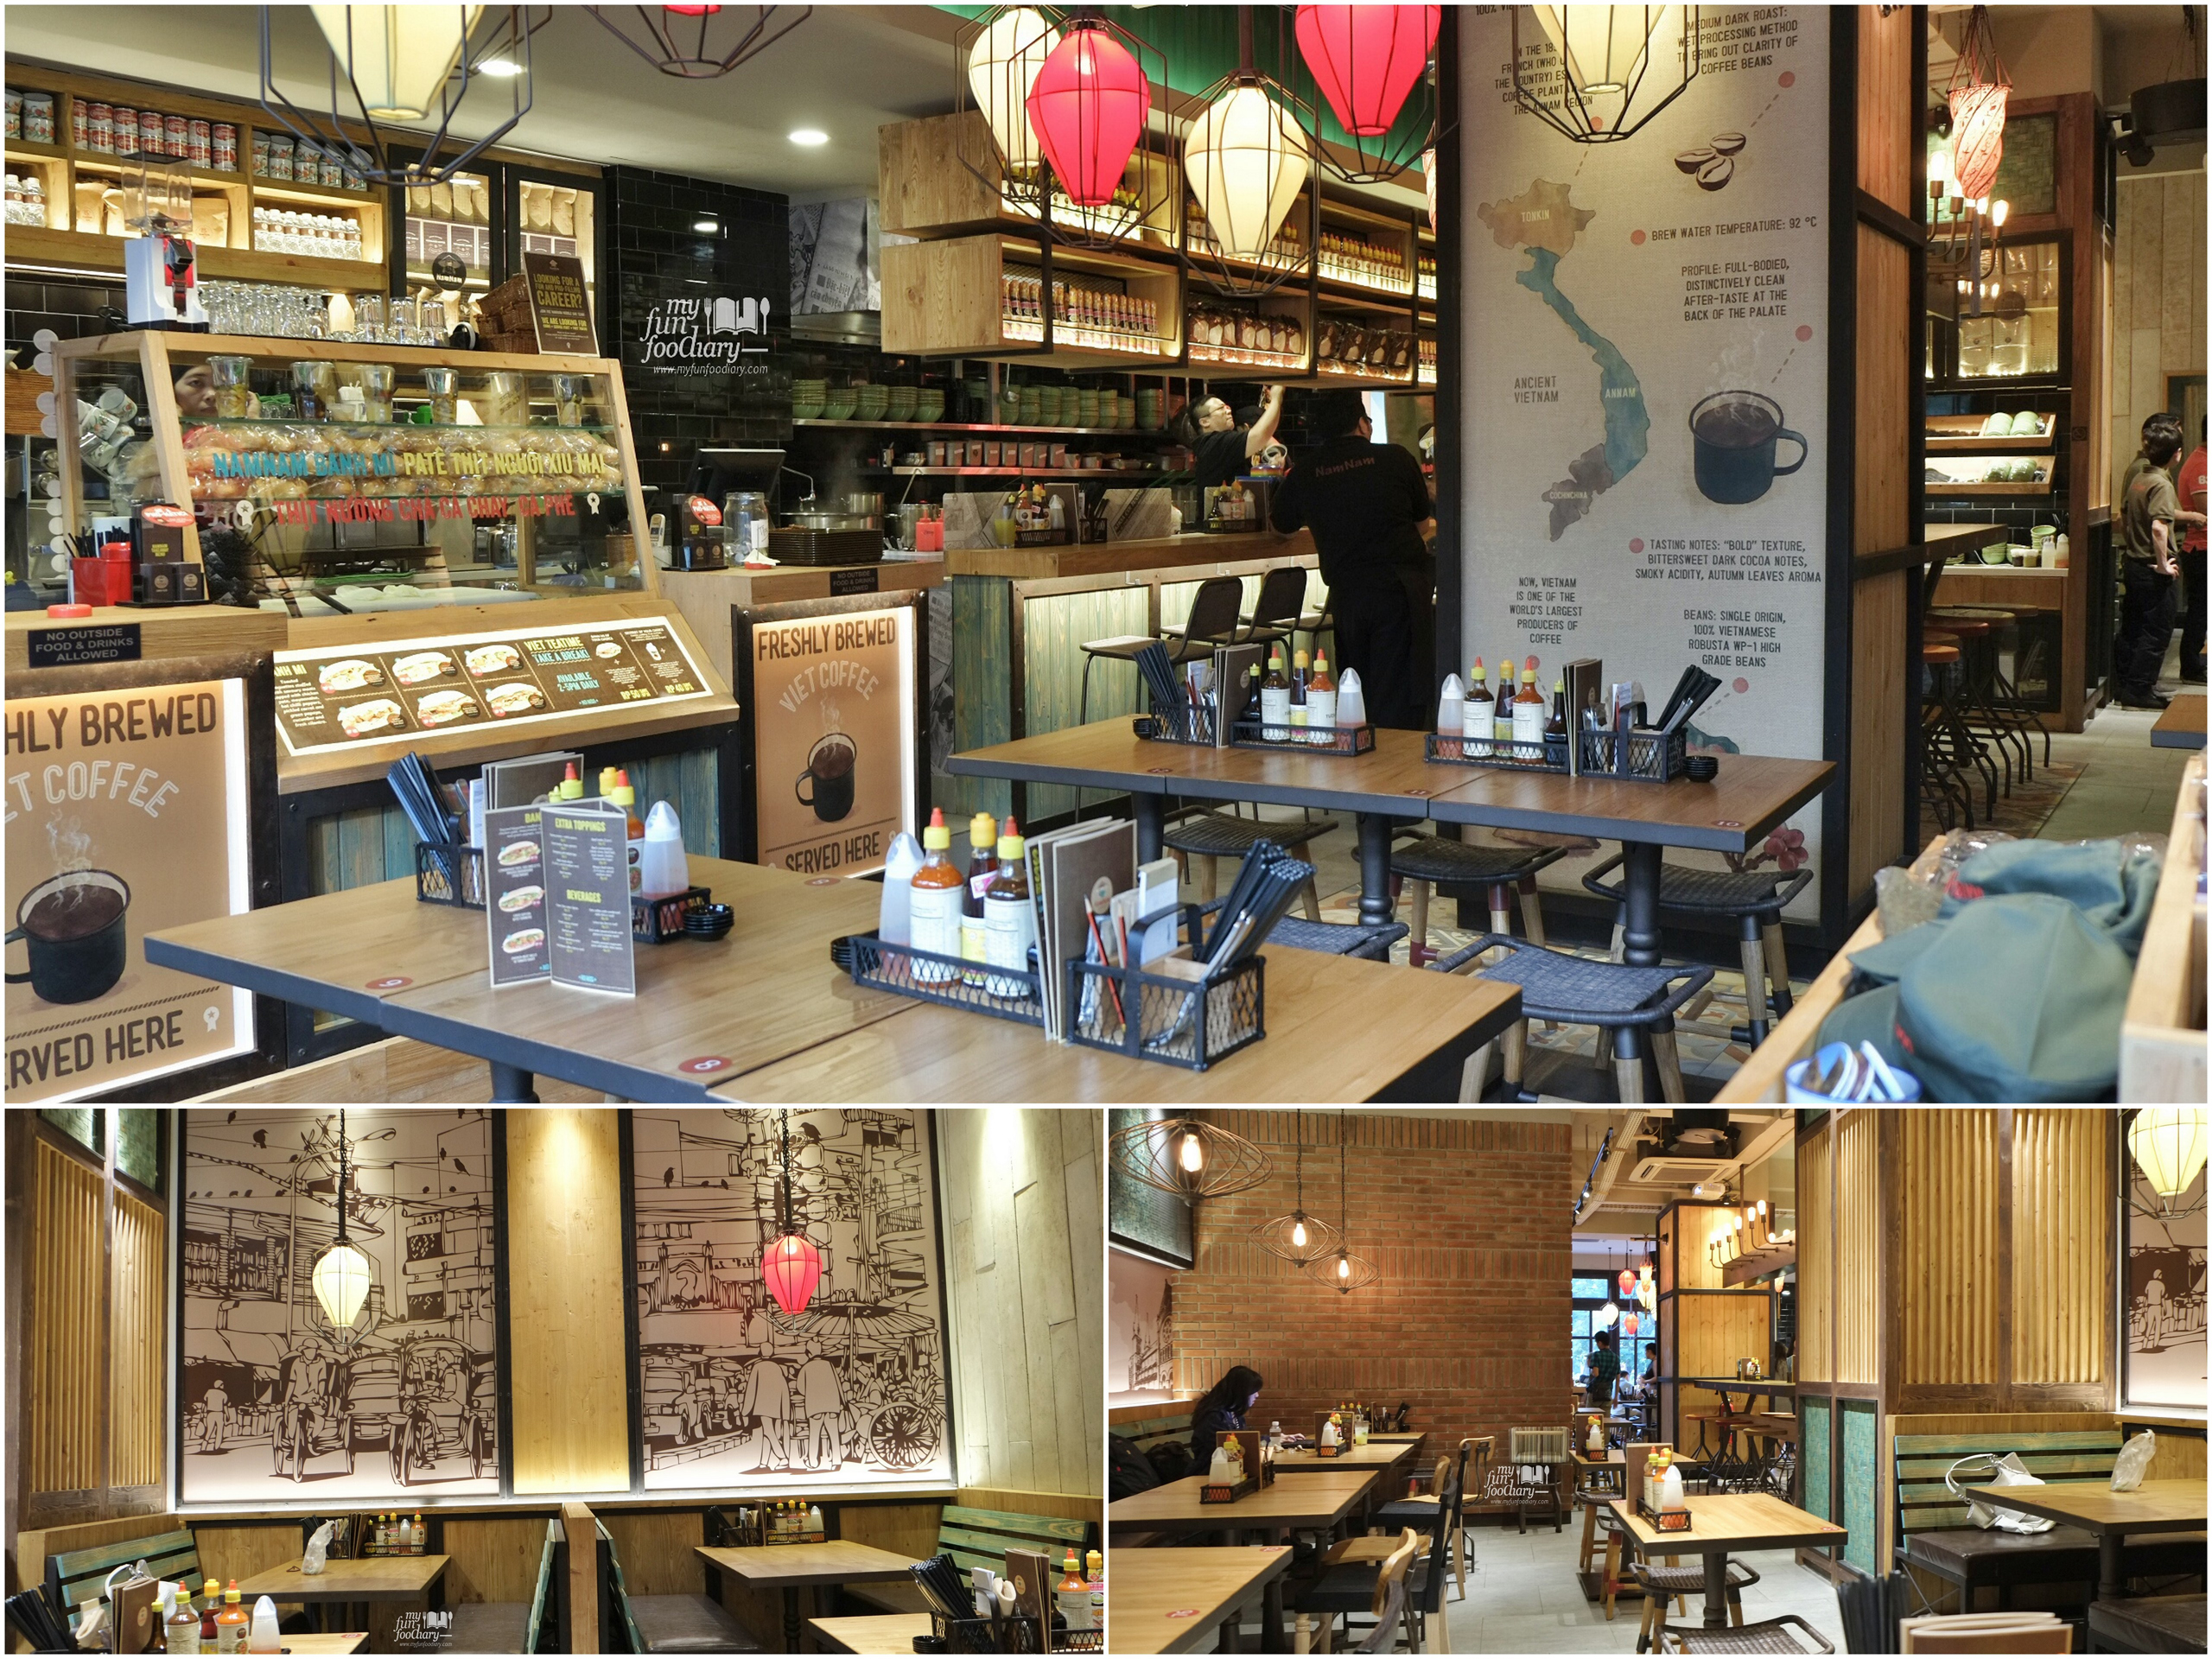 Interior Nam Nam Noodle Bar by Myfunfoodiary collage